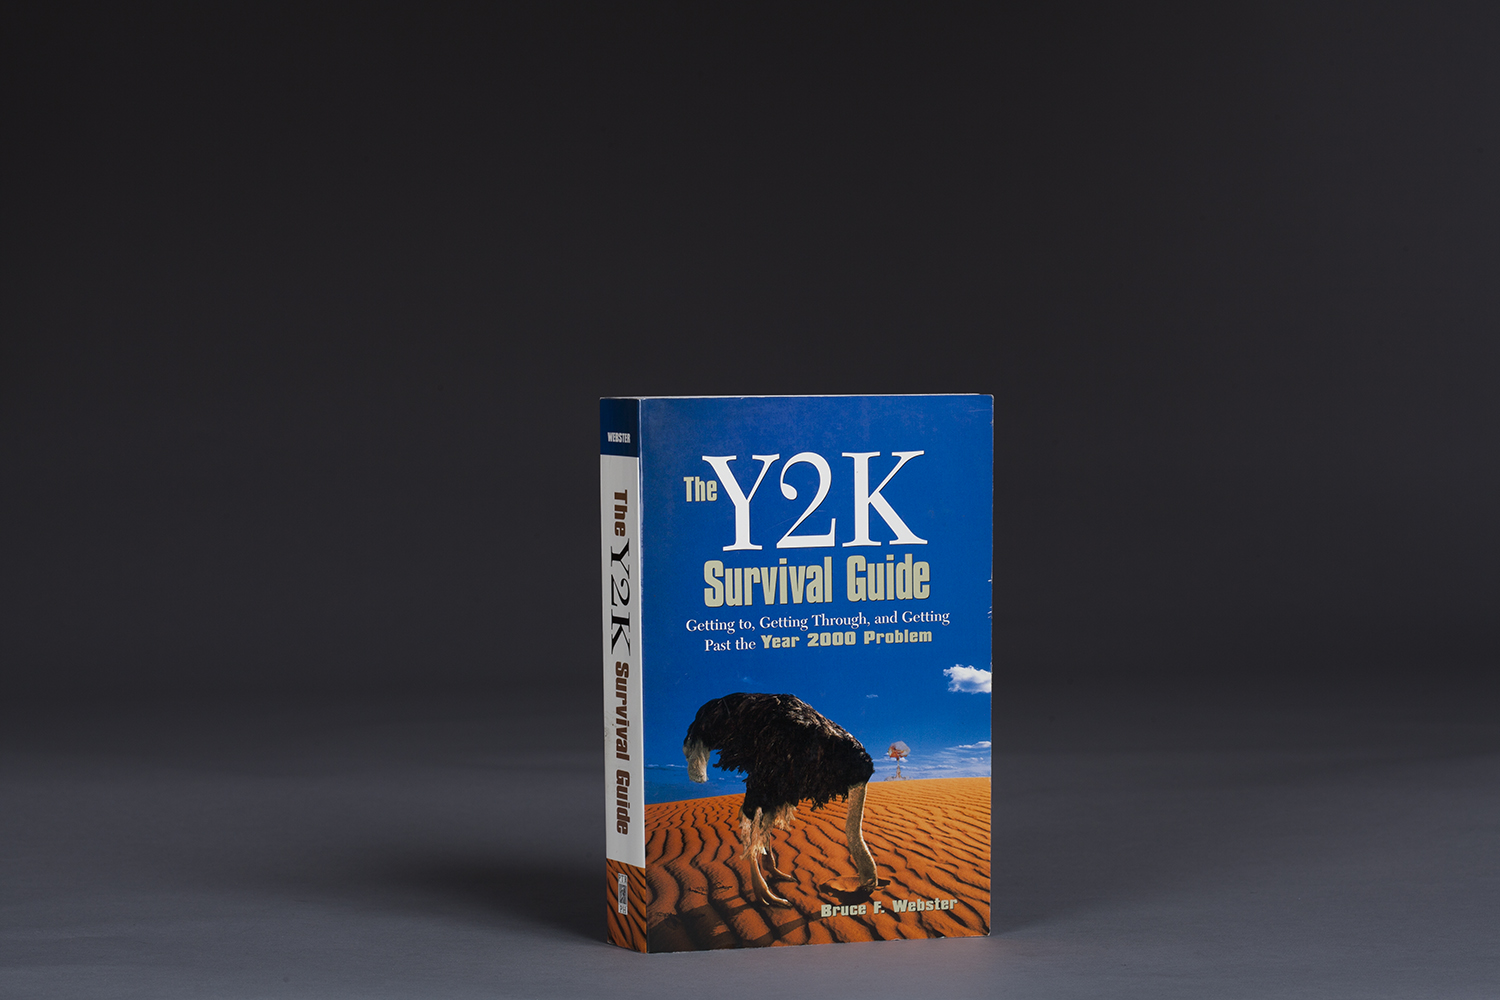 The Y2K Survival Guide - 0166 Cover.jpg